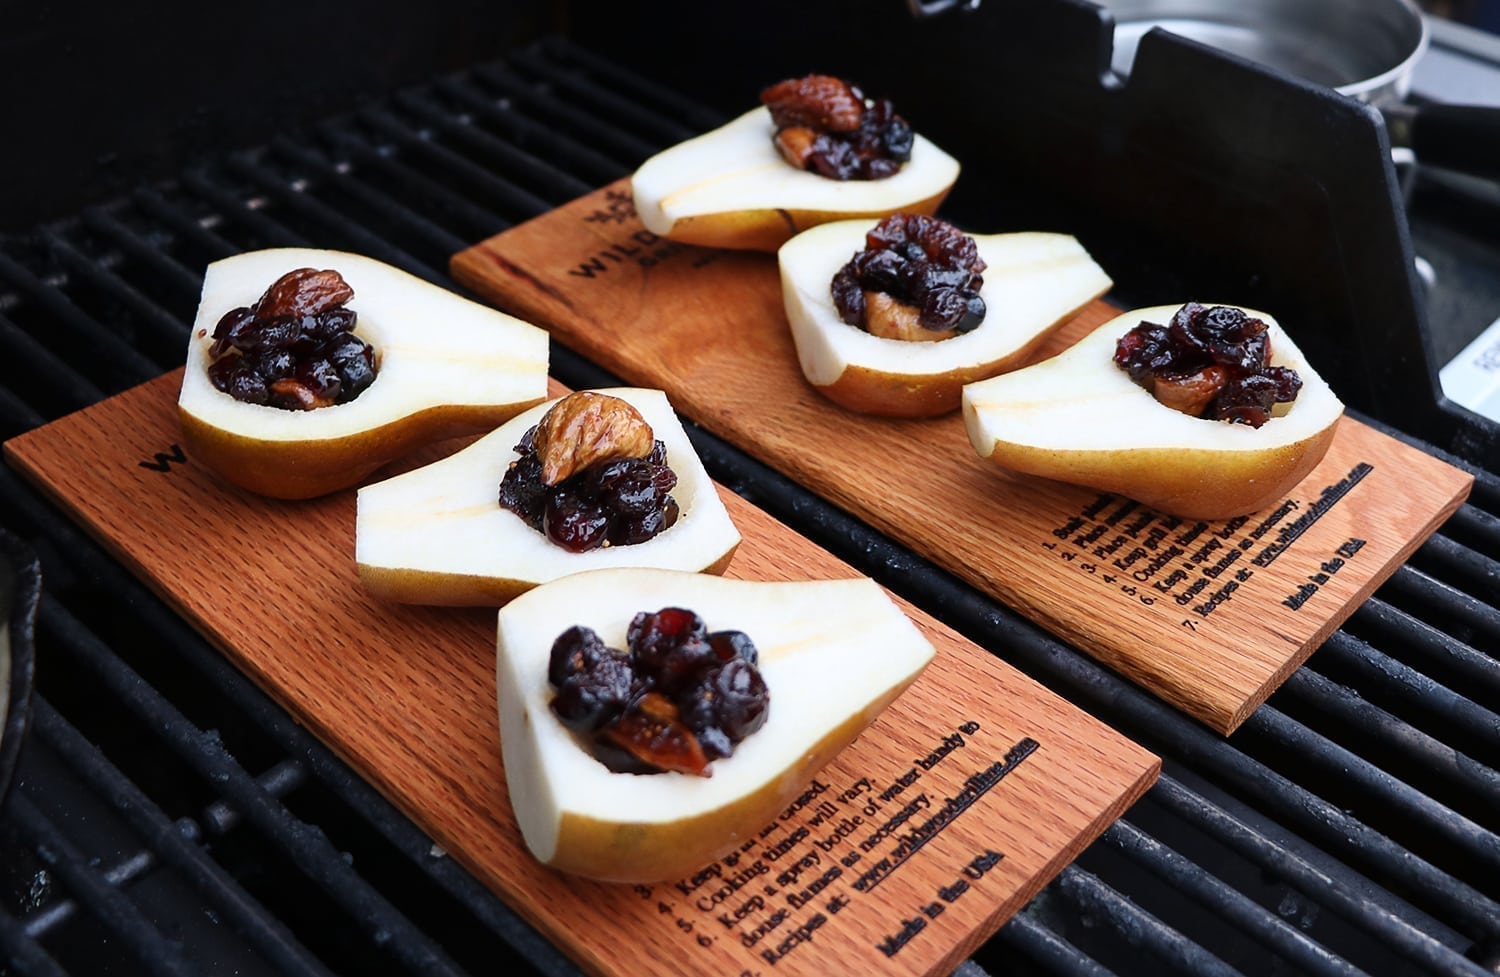 Cedar Planked Pears with Bourbon & Dried Fruit Compote